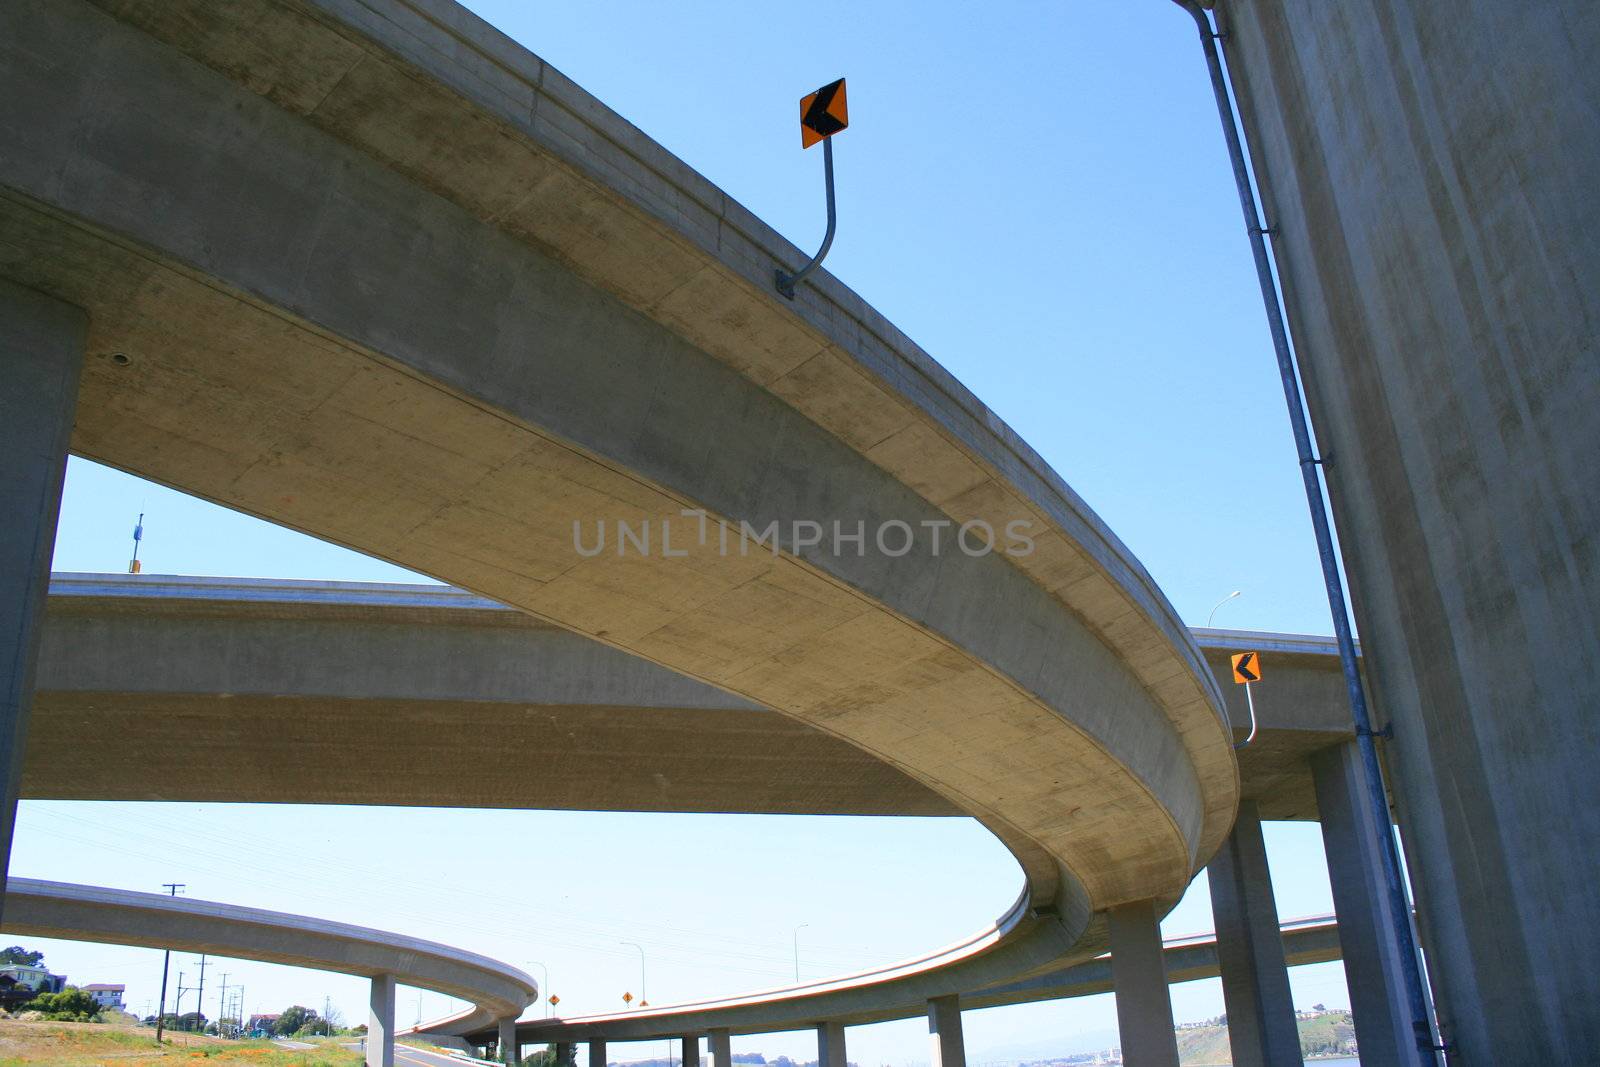 Close up of the empty freeway ramps.
